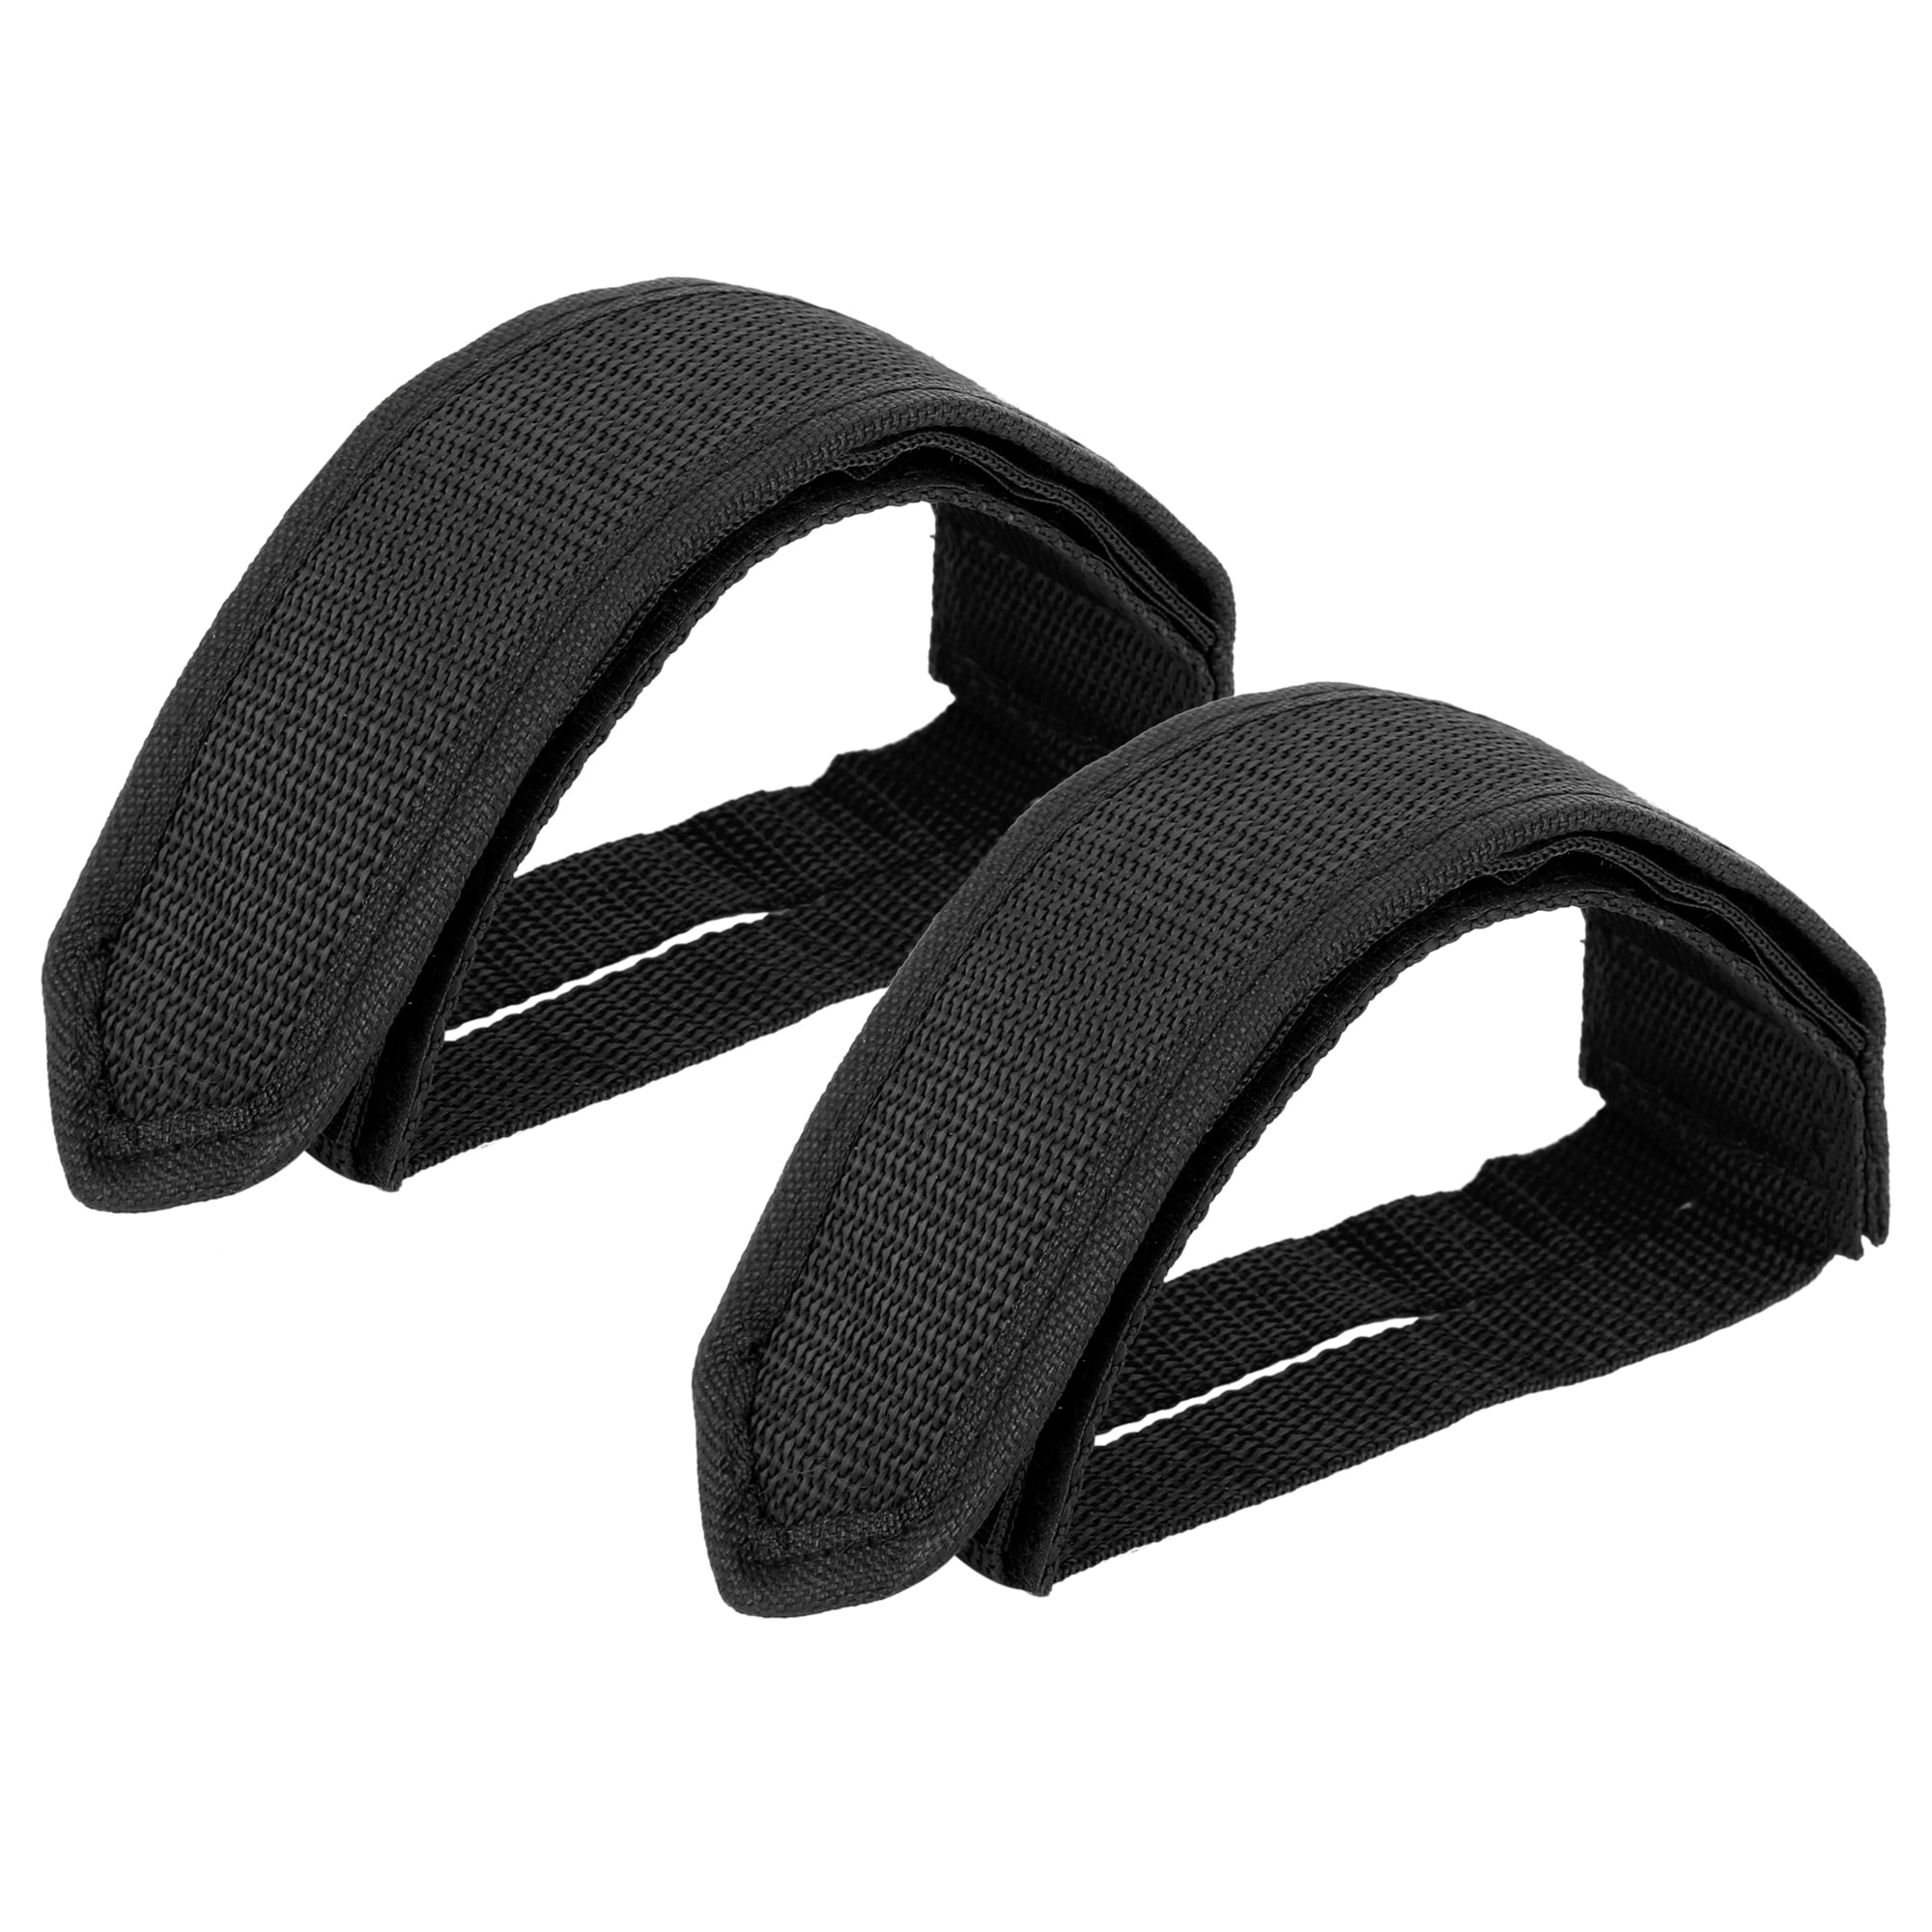 lasenersm 1 Pair Bicycle Feet Strap Exercise Bike Pedal Straps Foot Pedal Straps for Fixed Gear Bike DIY Bike Enthusiasts